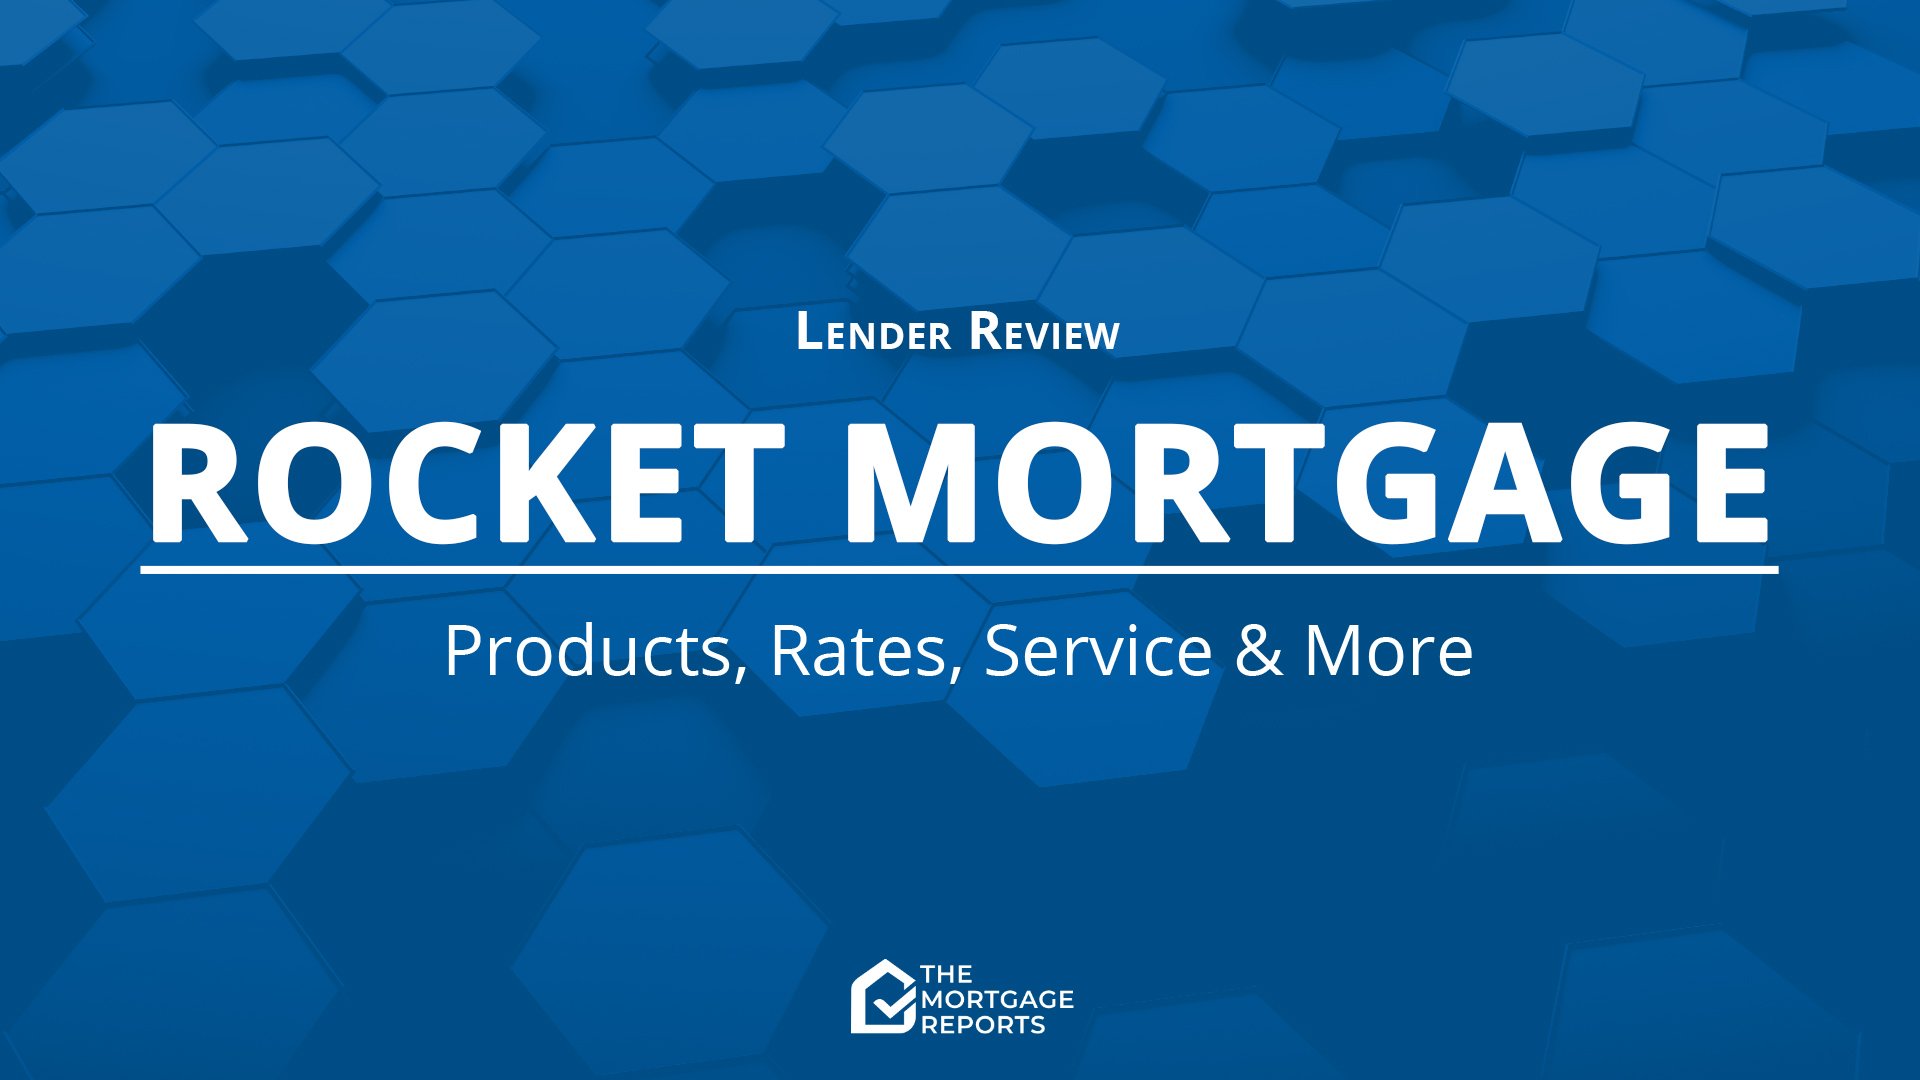 Rocket Mortgage Review for 2021